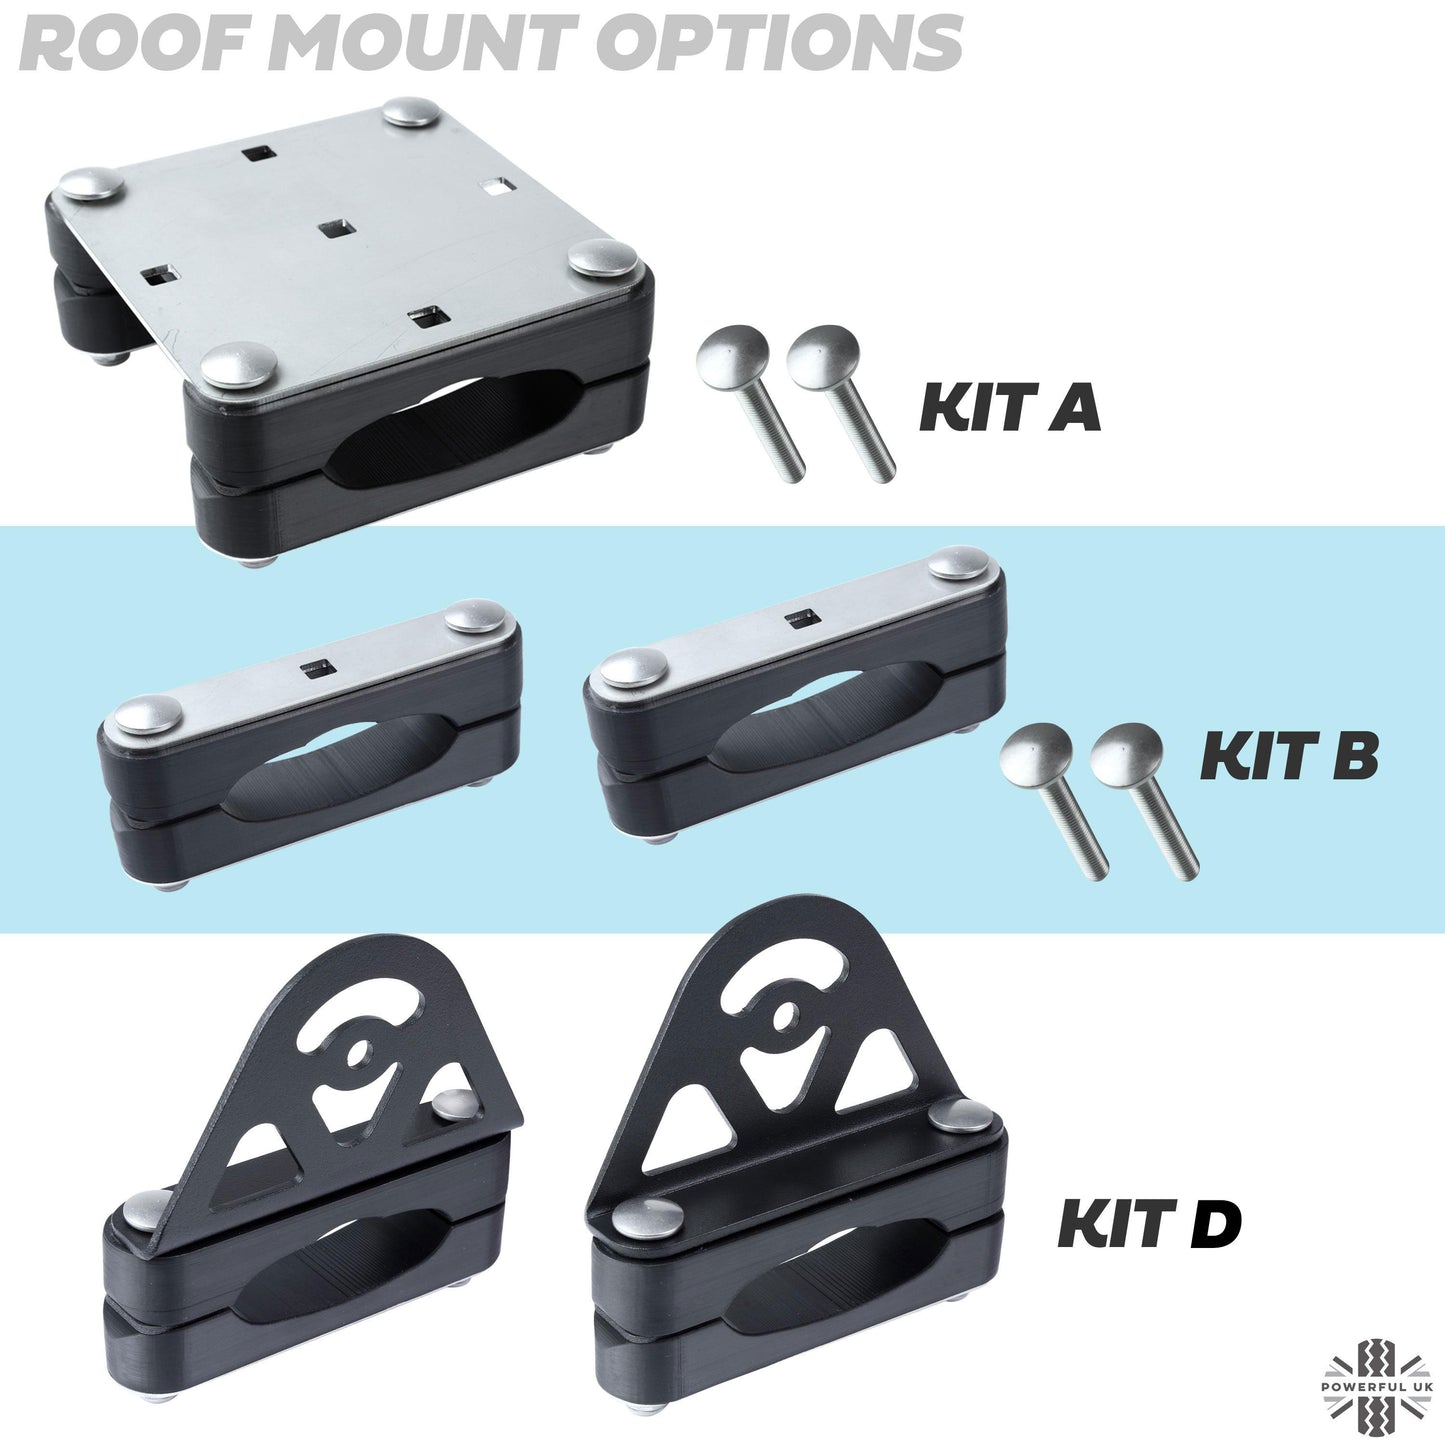 Roof Cross Bar Mount Clamp Kit for VW Transporter T5 & T6 Van - Kit A - Zinc Plated Top